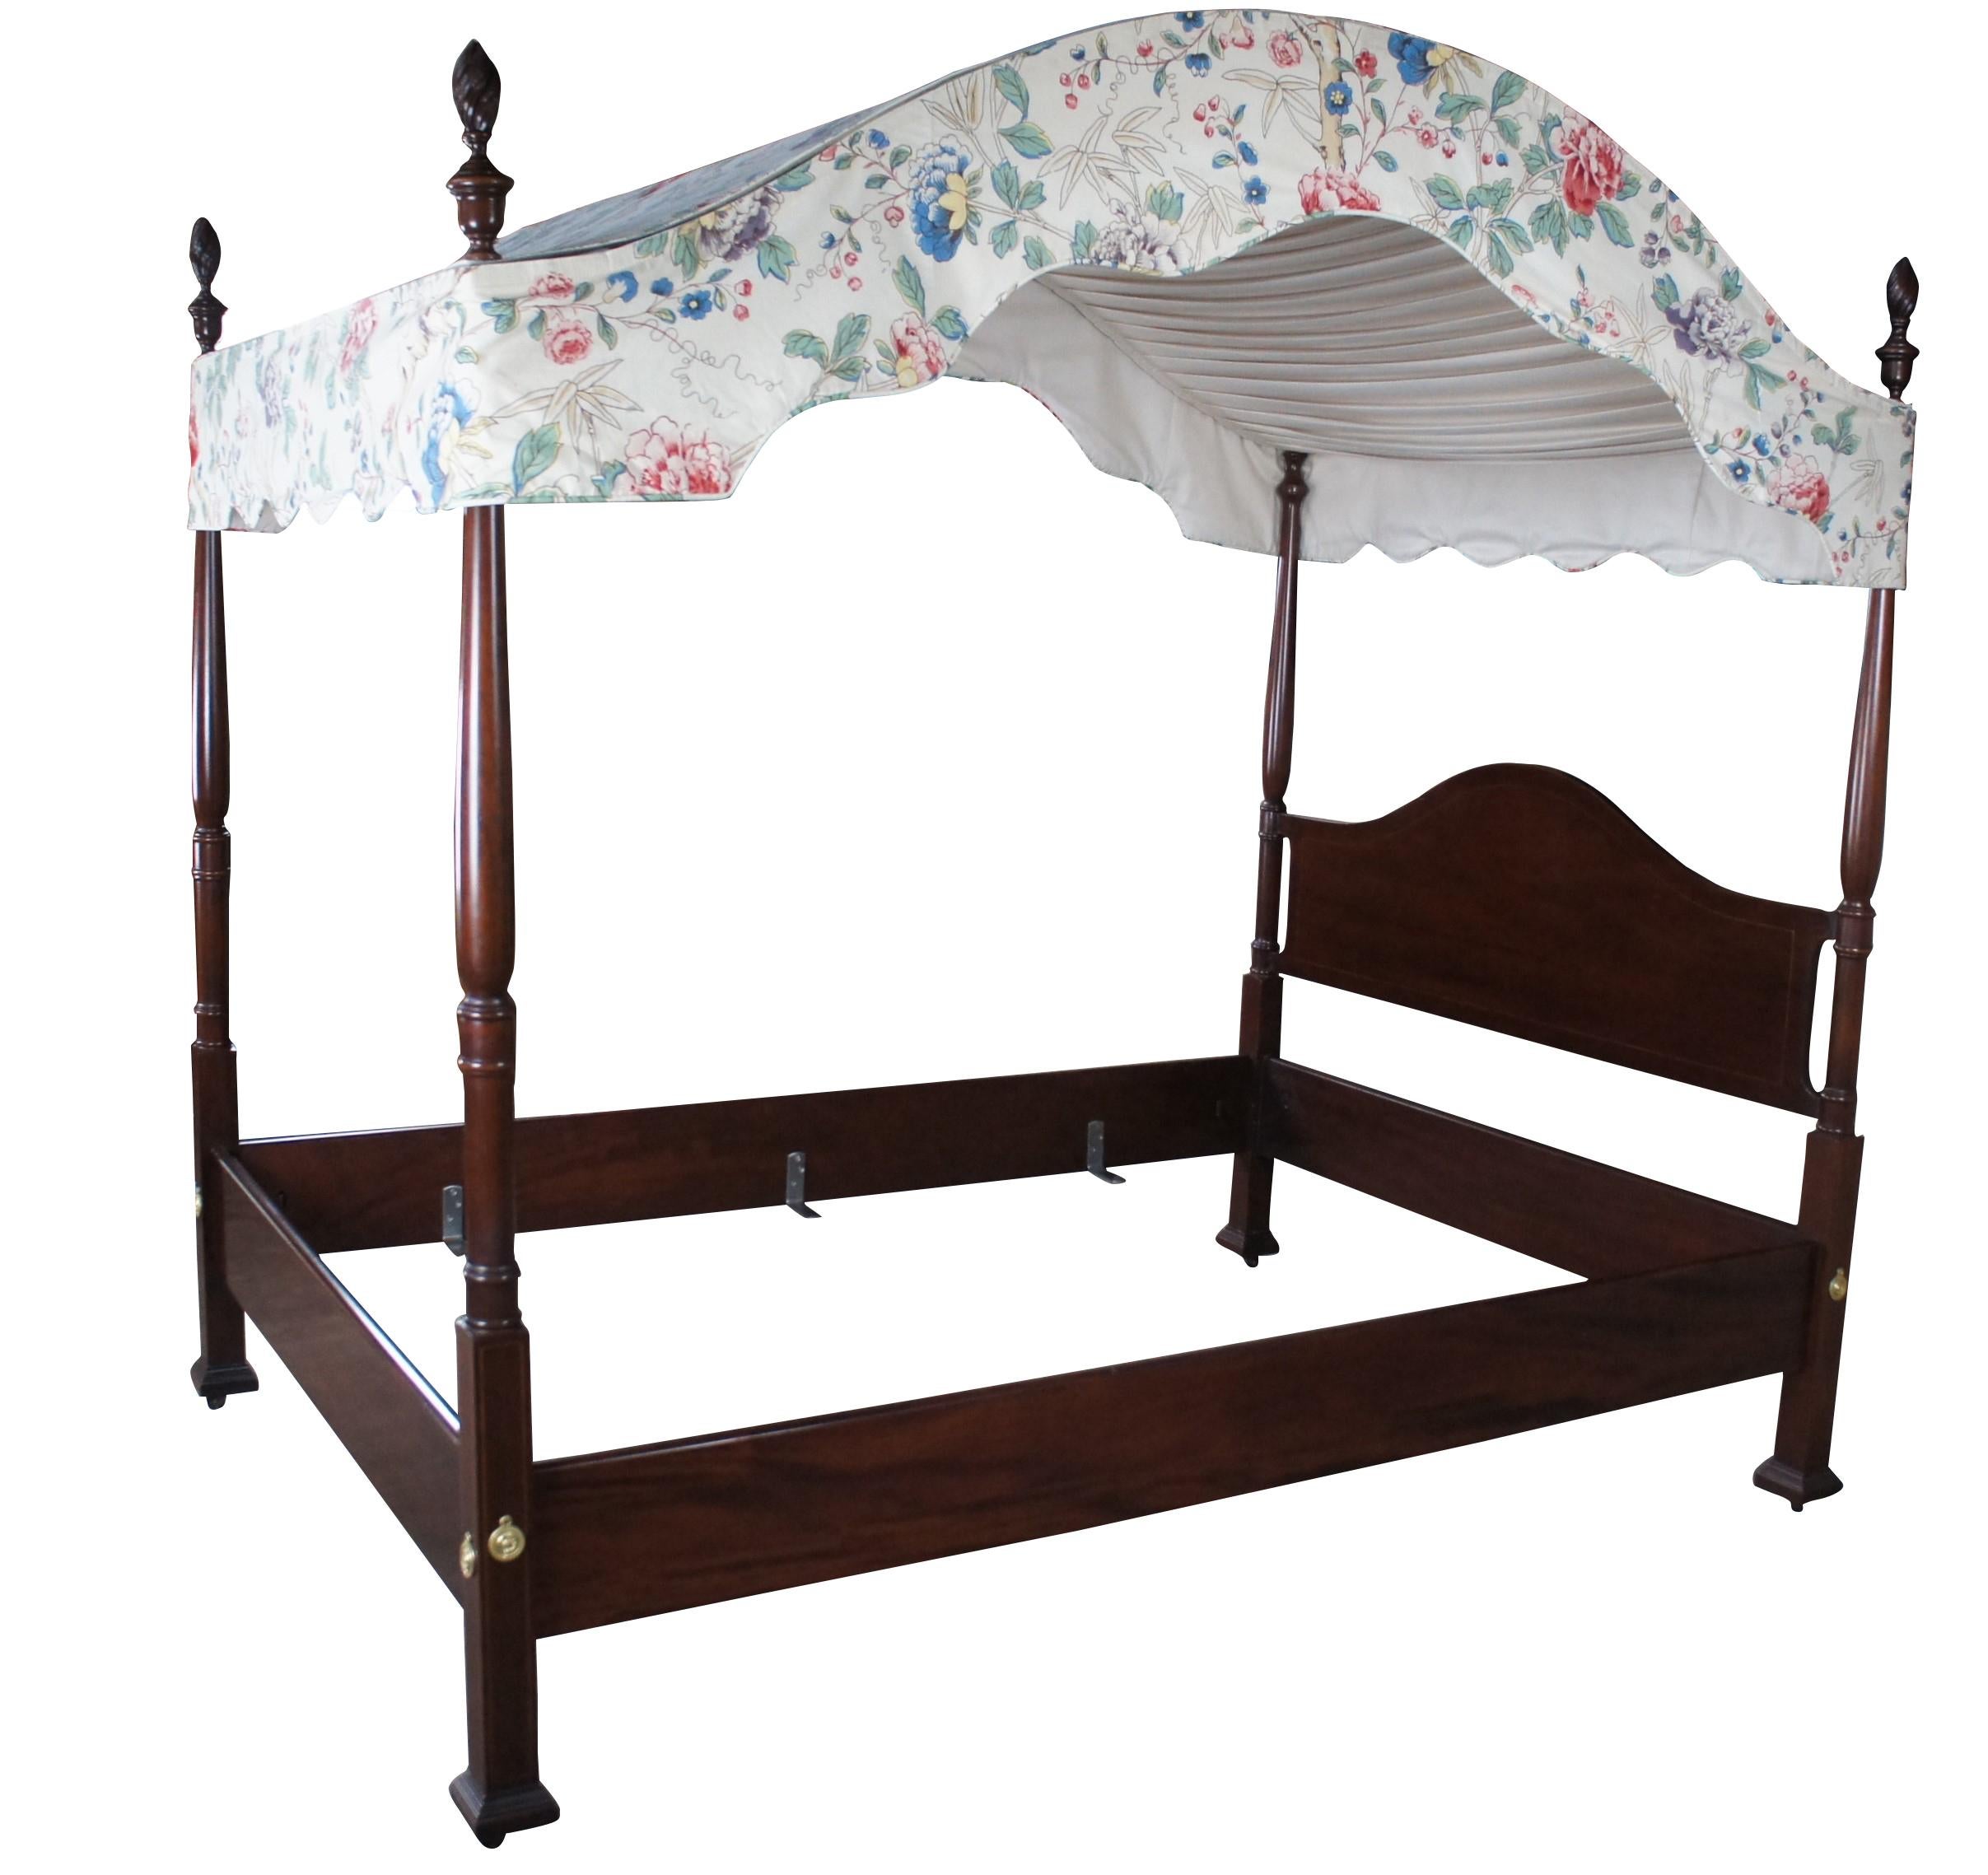 An impressive 20th Century inlaid mahogany four poster double size tester bed featuring Hepplewhite and colonial styling.  Features a camelback, through bolts and trophy cup turned and carved spire finials.  Includes a crewel style serpentine canopy